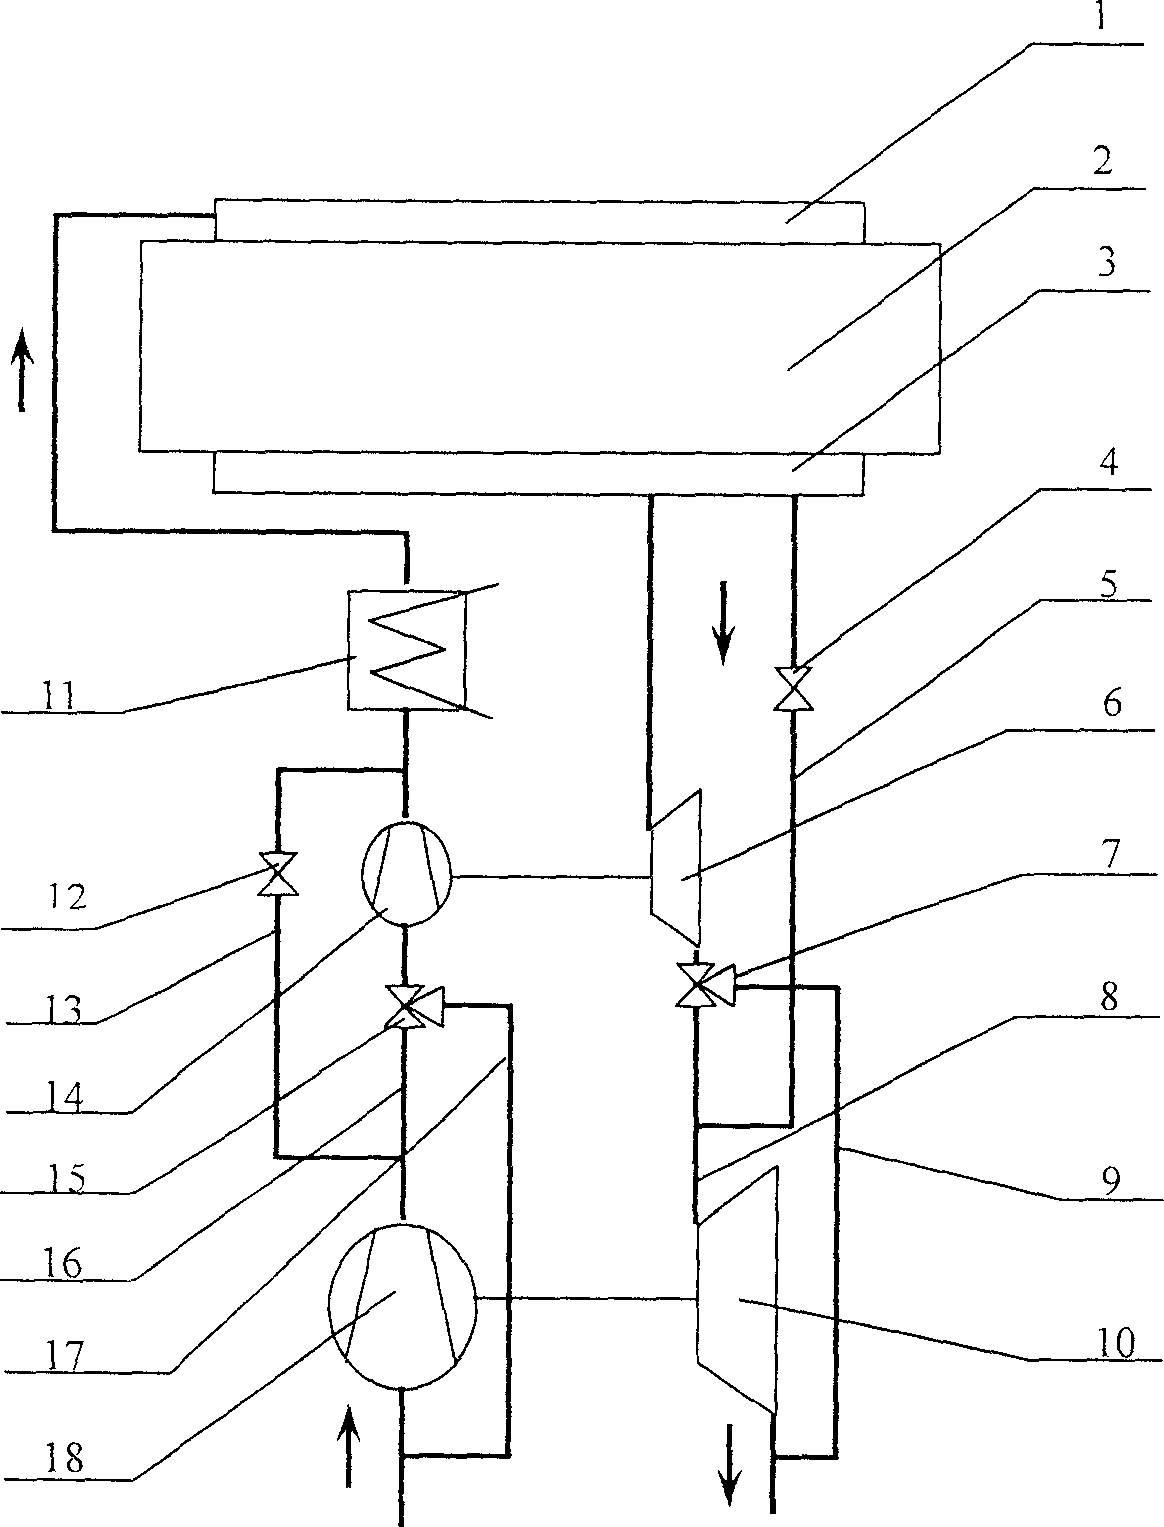 Adjustable high boost system with structure of series-parallel connection of turbochargers in different size